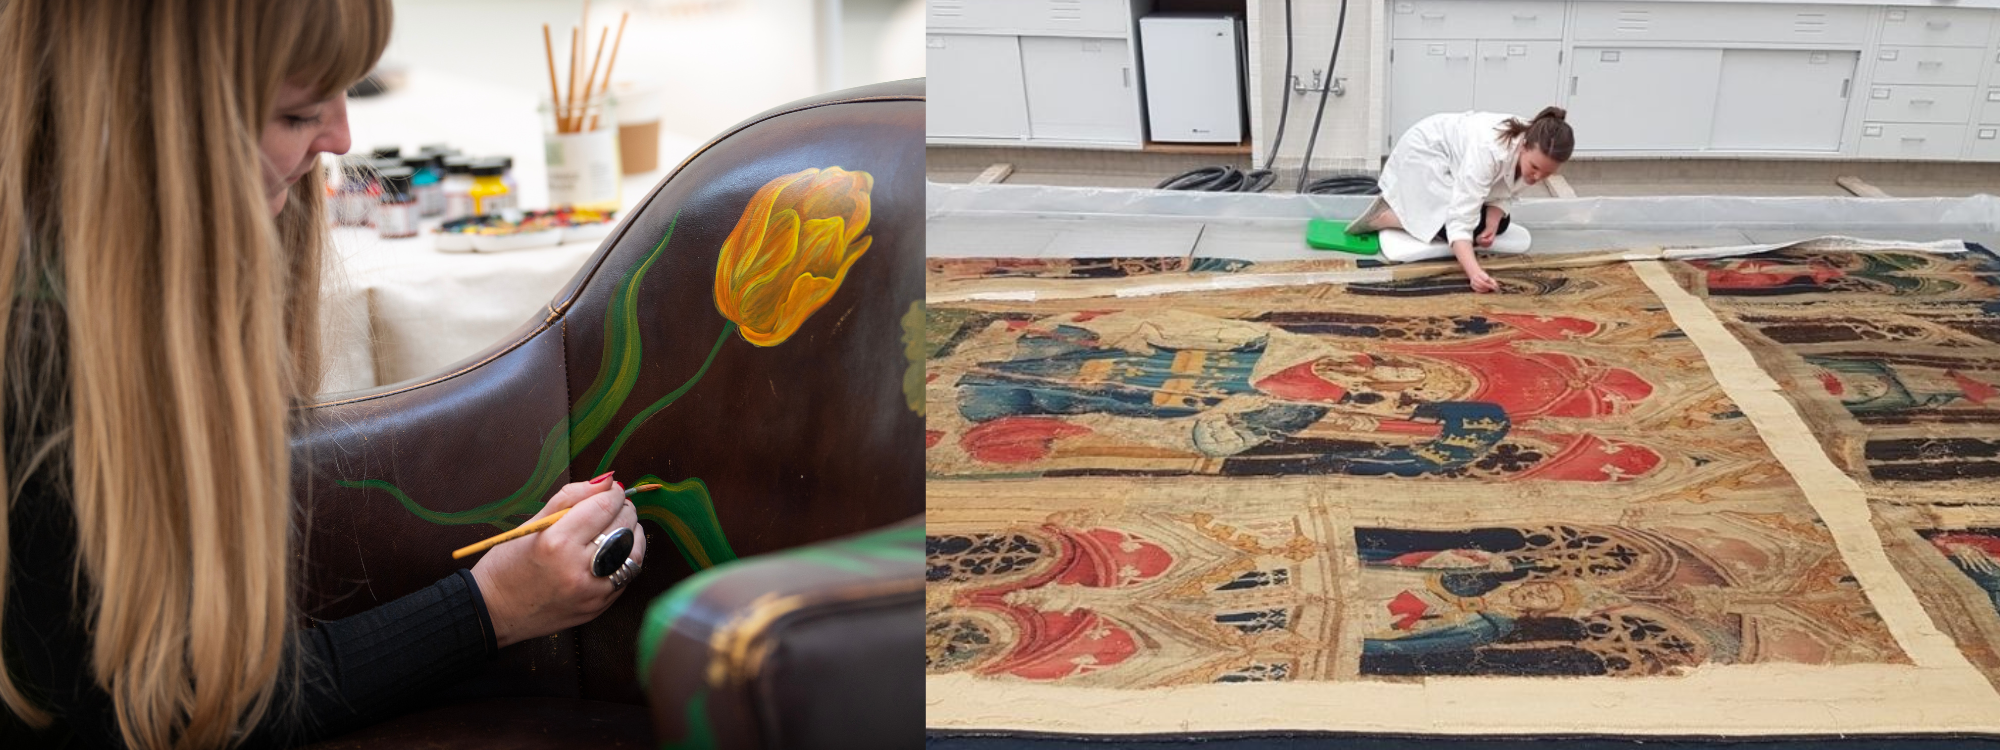 Images of QEST scholars working on painting furniture and fabric restoration.